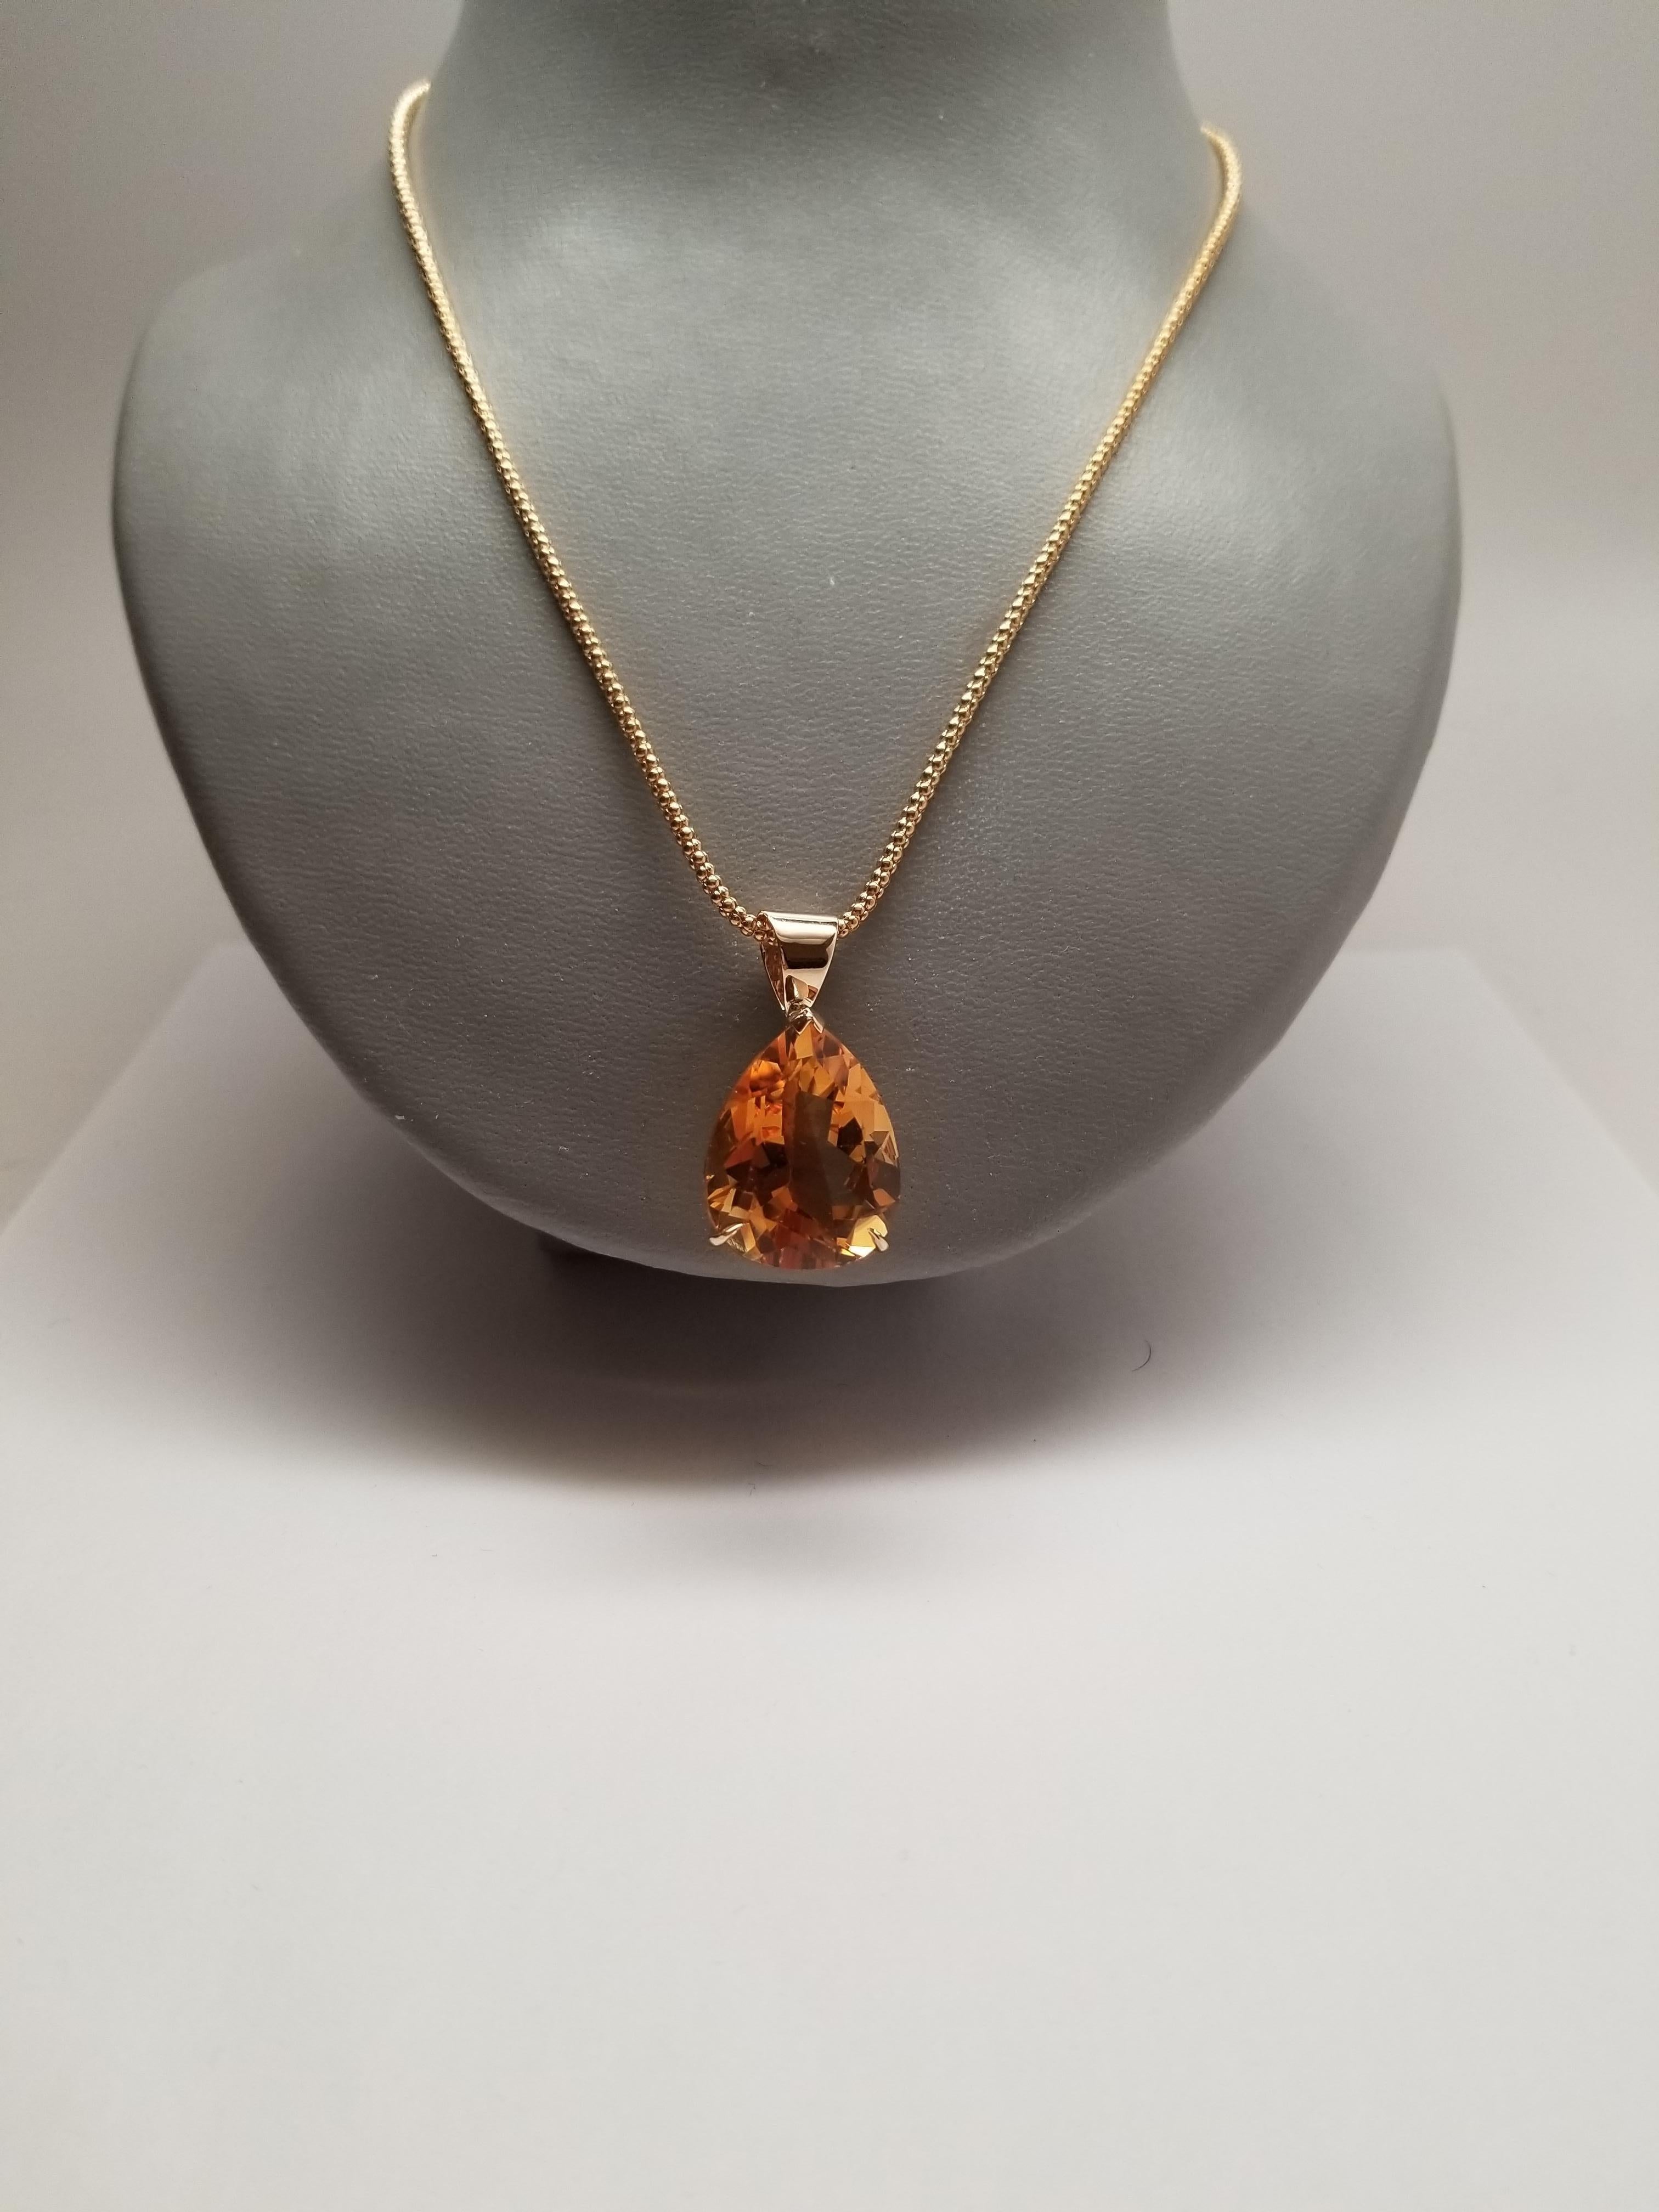 Add a touch of elegance to your jewelry collection with this stunning LaFrancee 14k yellow gold pendant featuring a pear-shaped natural citrine stone in a beautiful mandarin orange color. The teardrop-shaped pendant is expertly crafted with fine